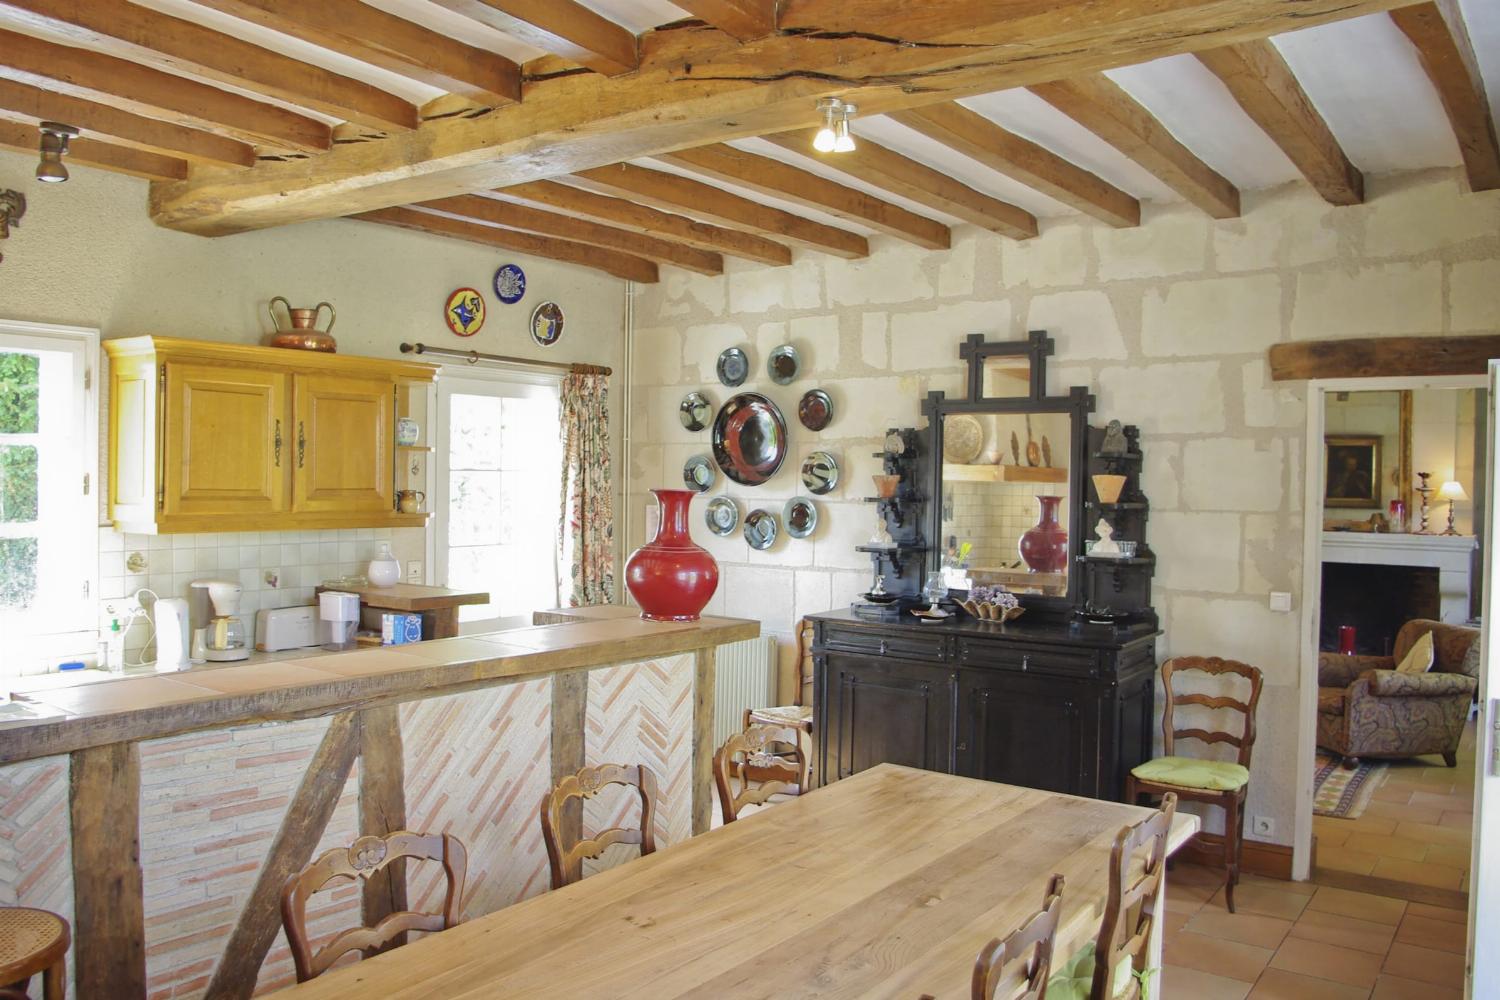 Dining room | Holiday home in the Loire Valley